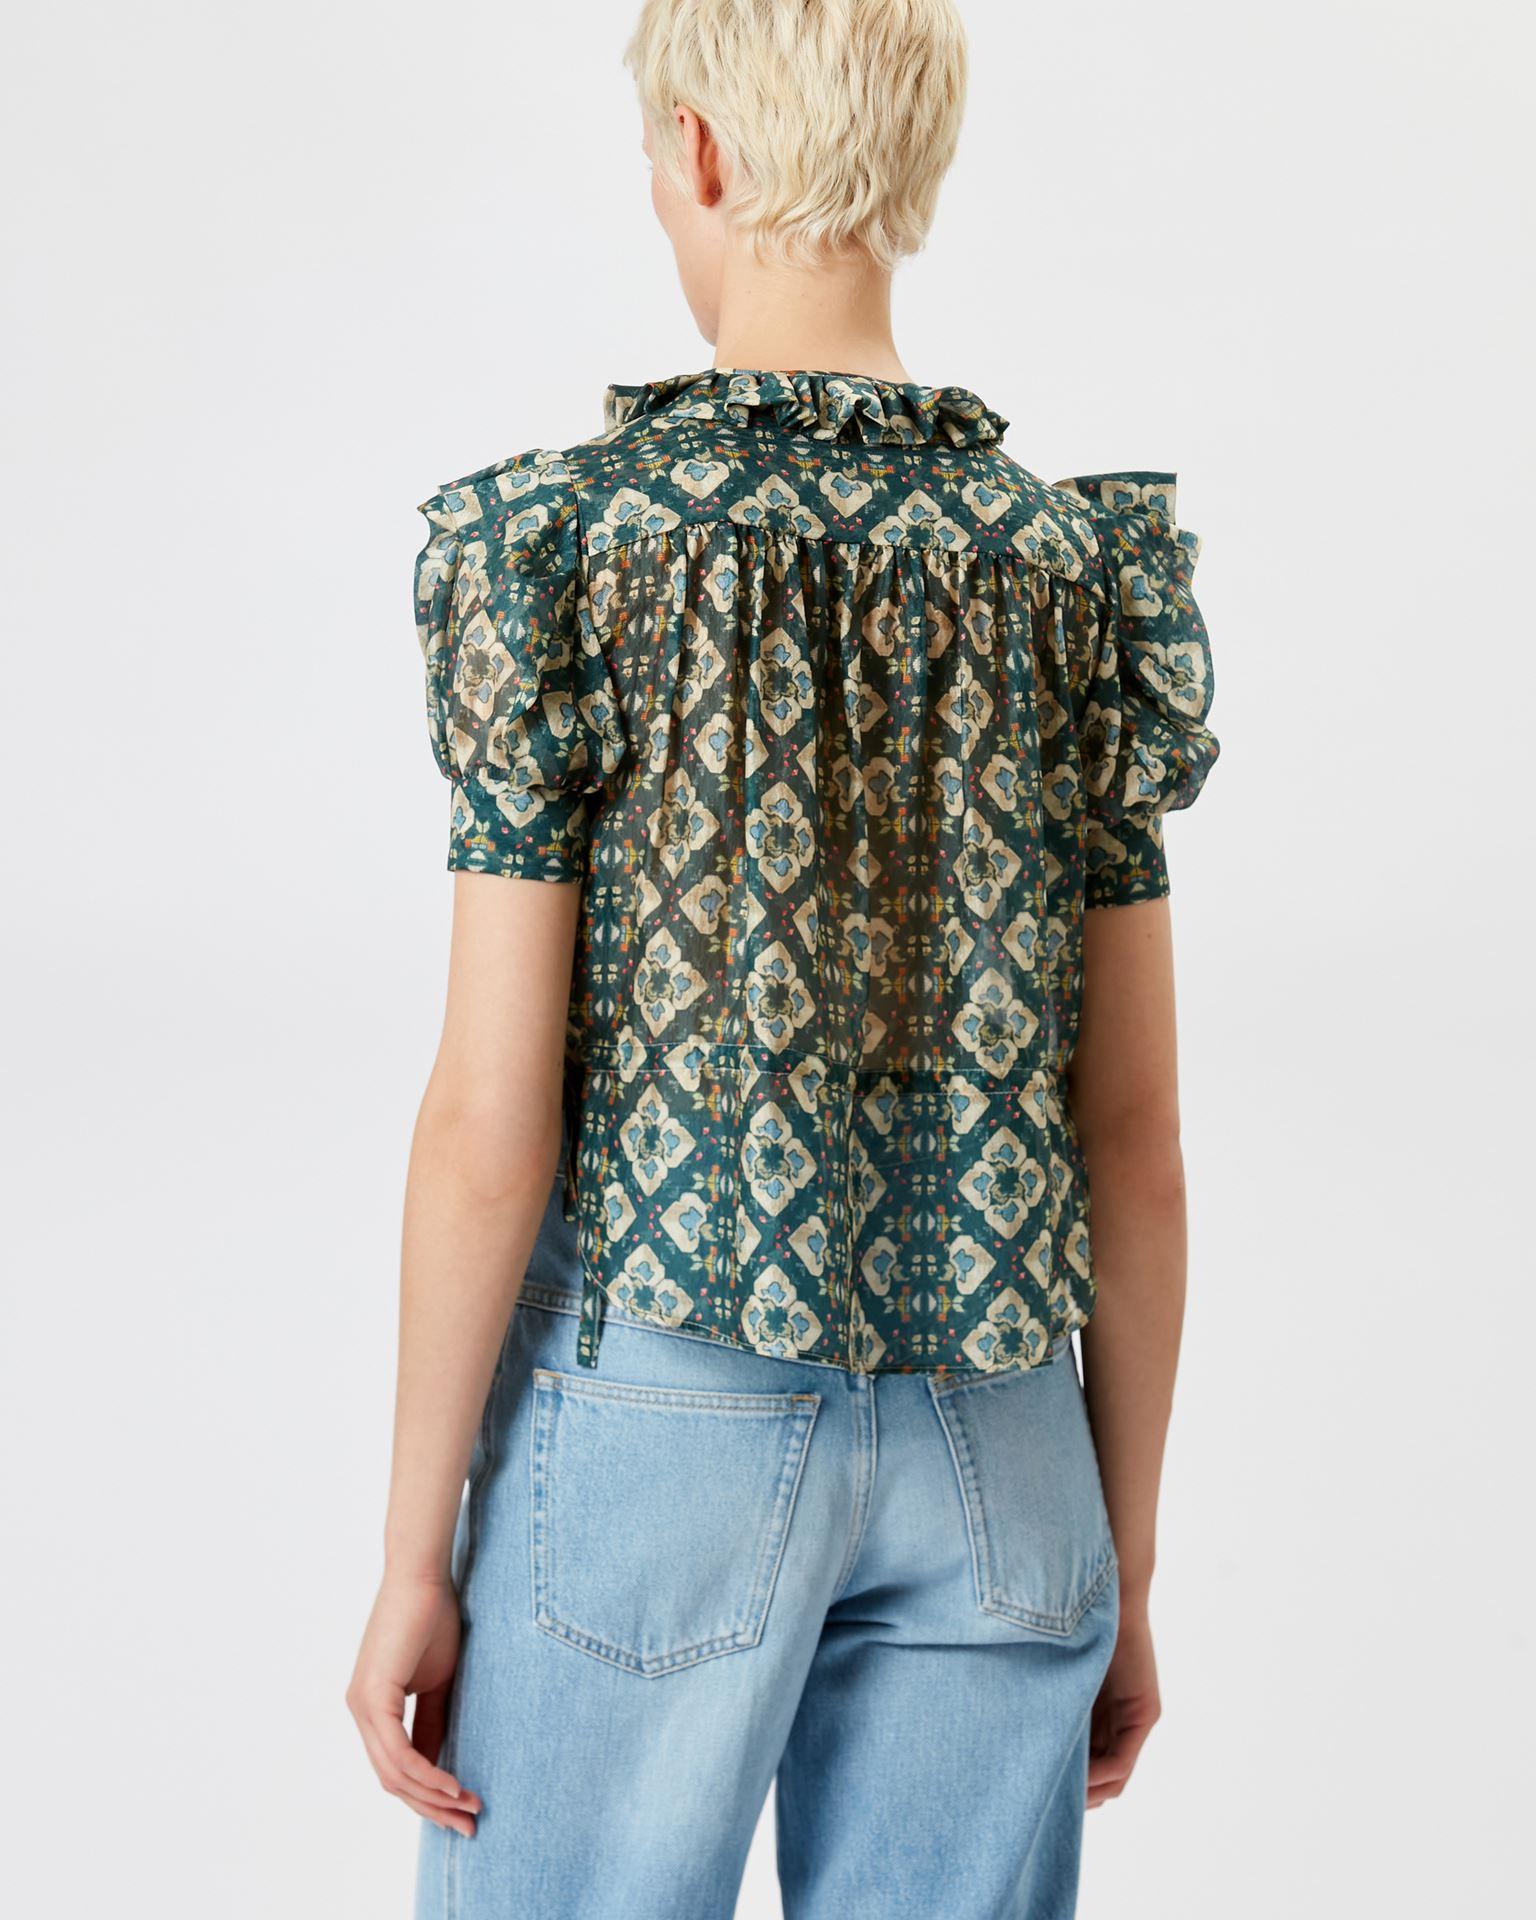 Isabel Marant Annaelle Top in Lyst